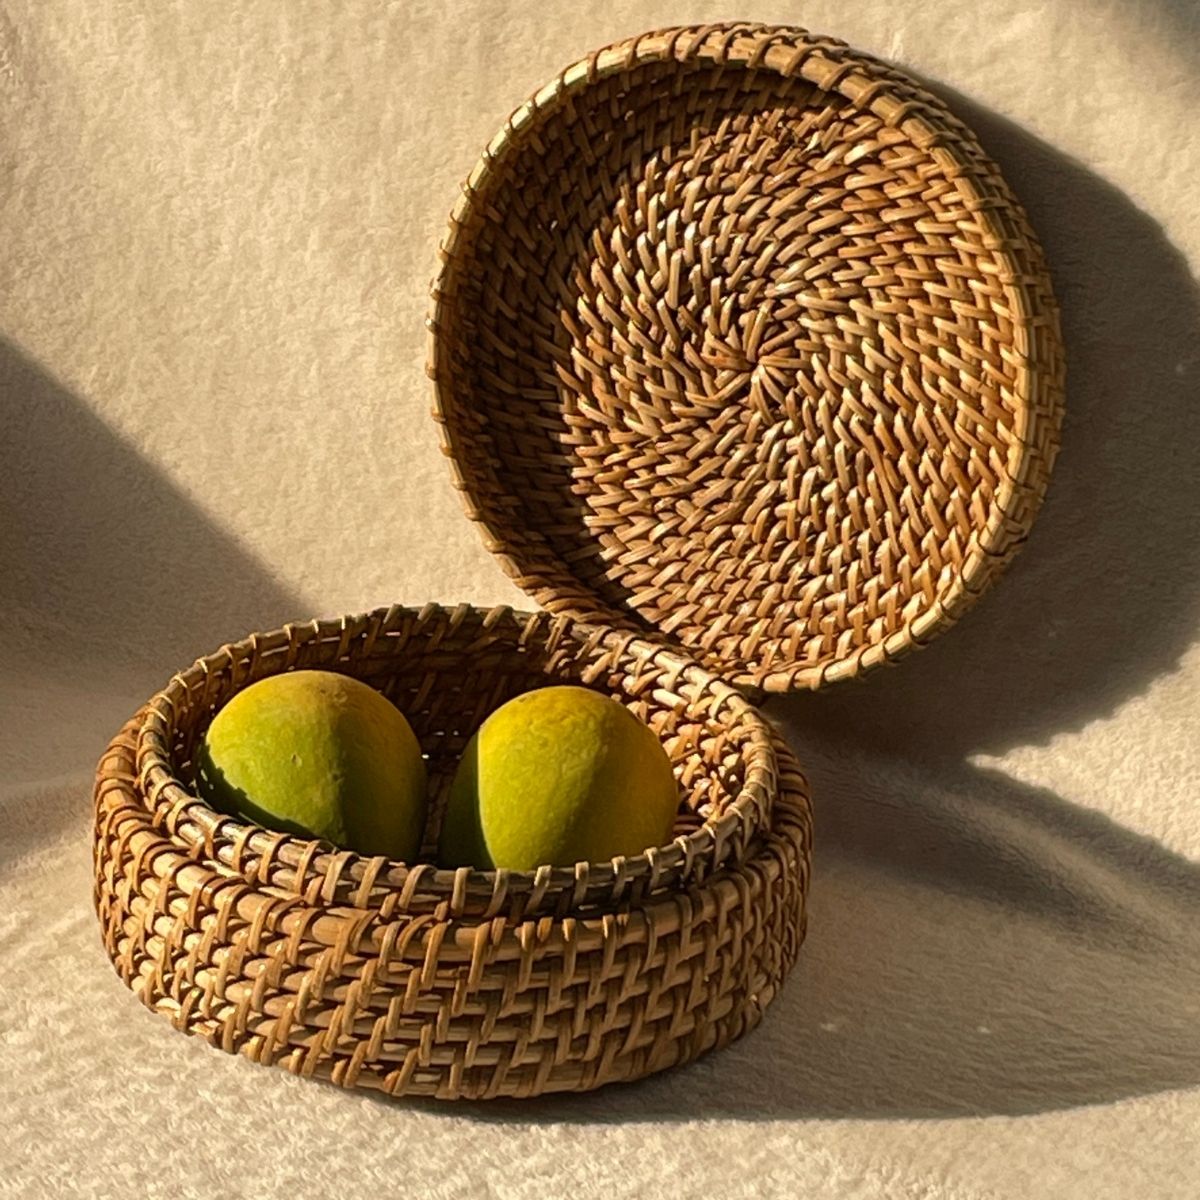 Cane Rattan Roti Basket with Cover Lid Shop Online India Handmade Natural Fiber